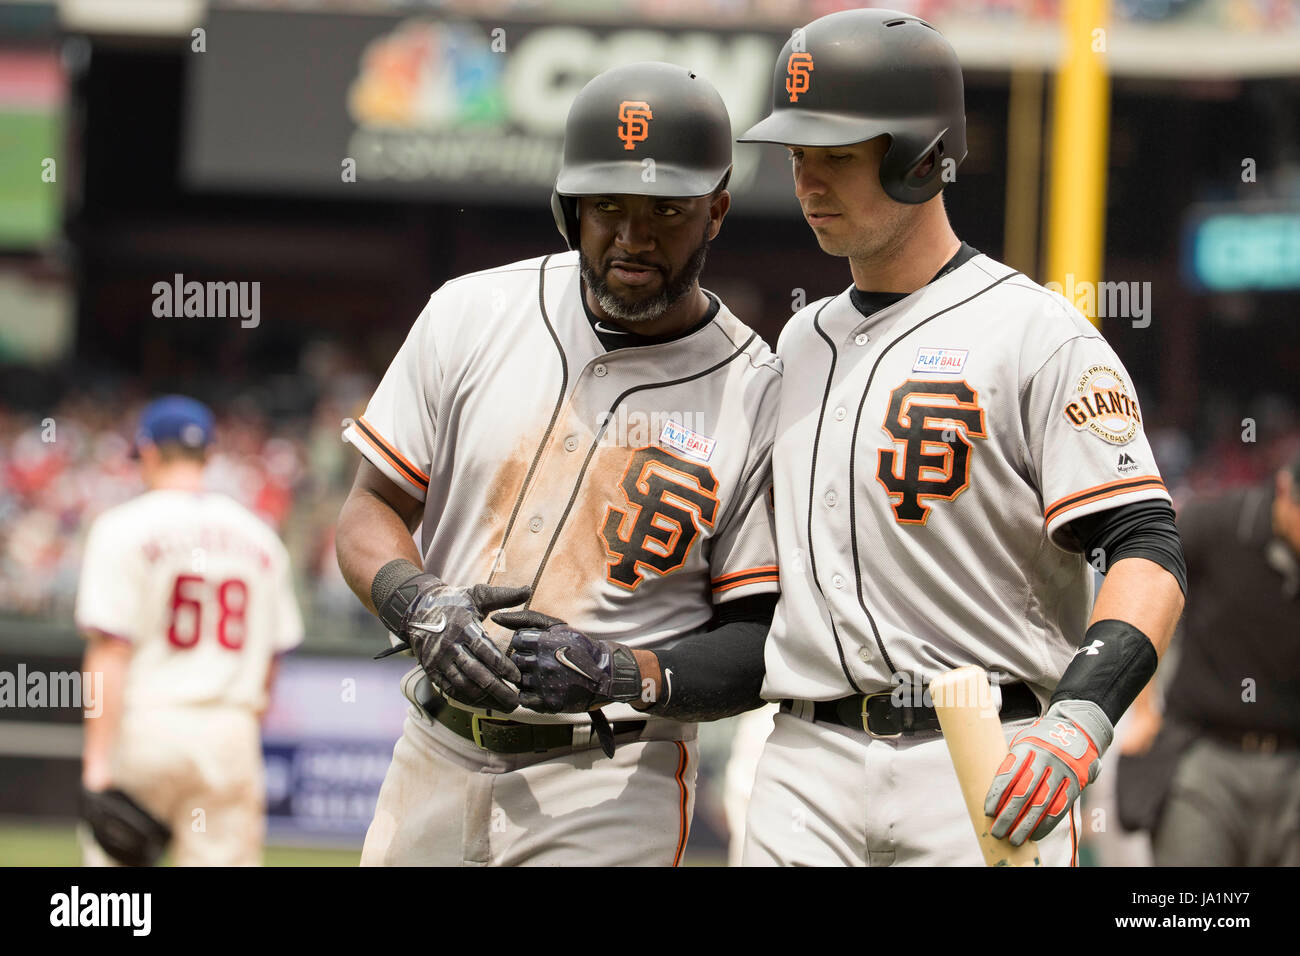 Philadelphia, Pennsylvania, USA. 4th June, 2017. San Francisco Giants center fielder Denard Span (2) listens to catcher Buster Posey (28) after he scores on the sacrifice fly by Posey during the MLB game between the San Francisco Giants and Philadelphia Phillies at Citizens Bank Park in Philadelphia, Pennsylvania. Christopher Szagola/CSM/Alamy Live News Stock Photo